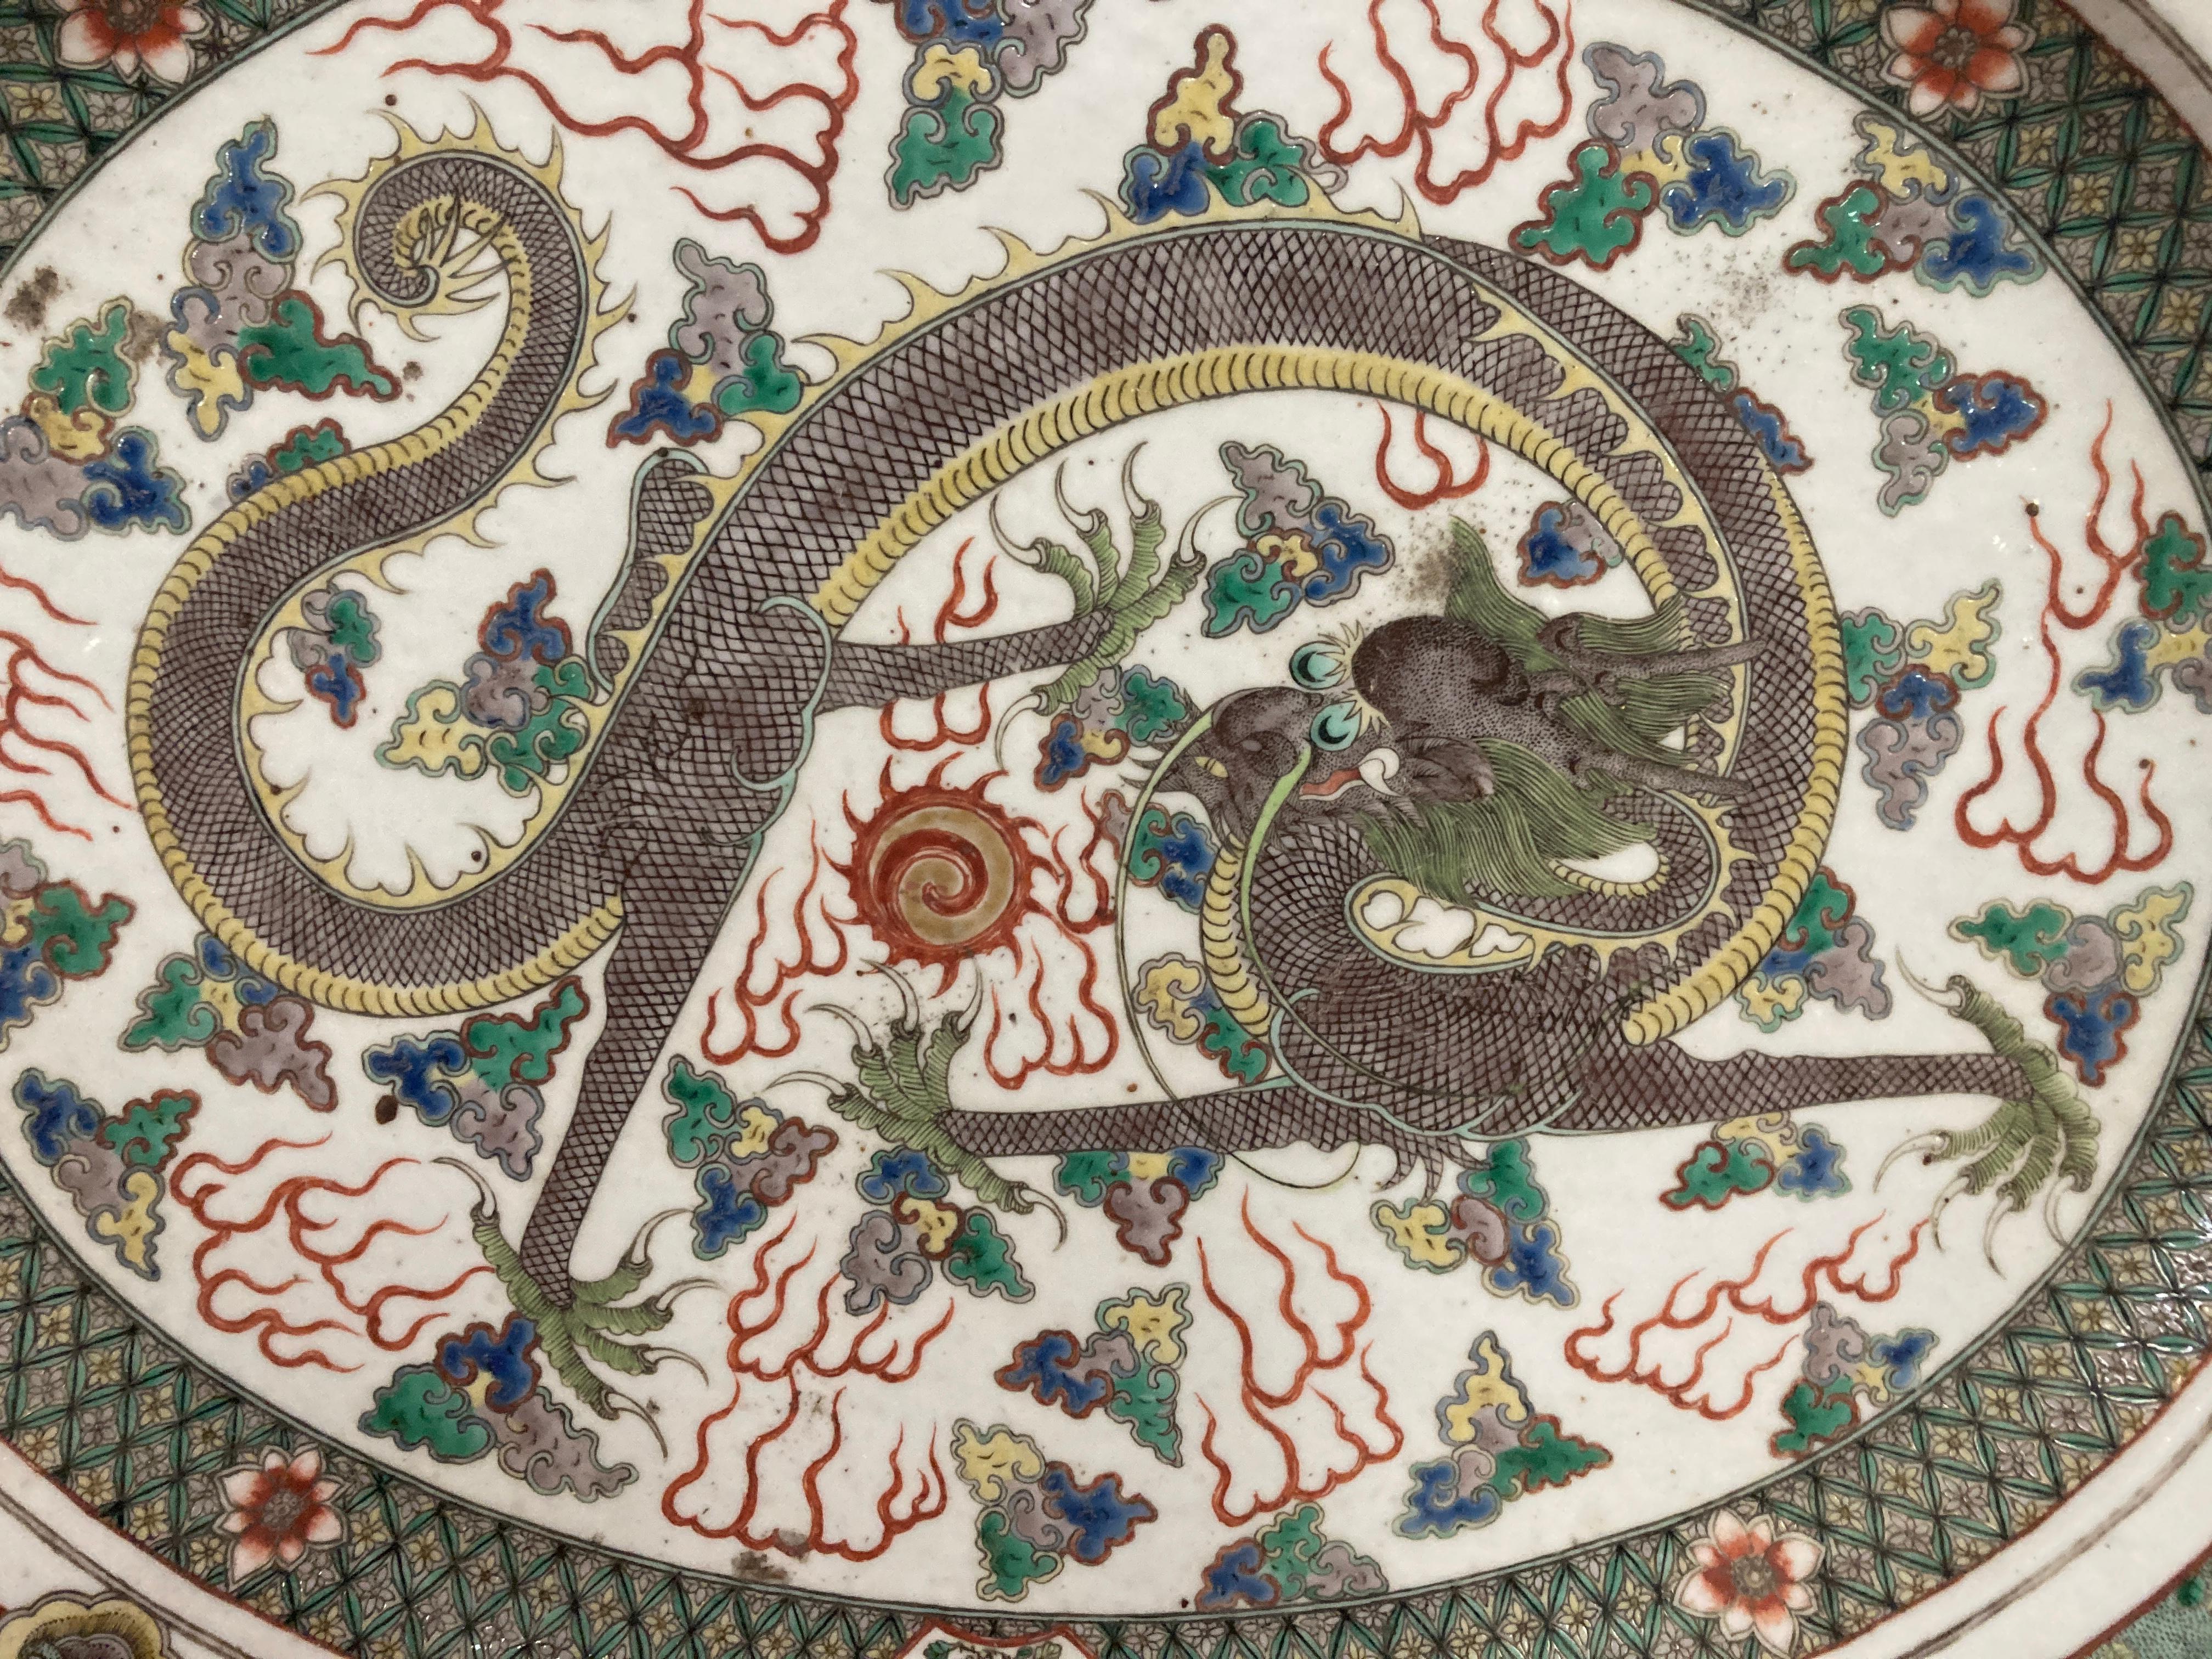 Fine pair of Chinese export famille verte platters depicting a dragon. These platters are fine quality without damages and date from the 1870s.